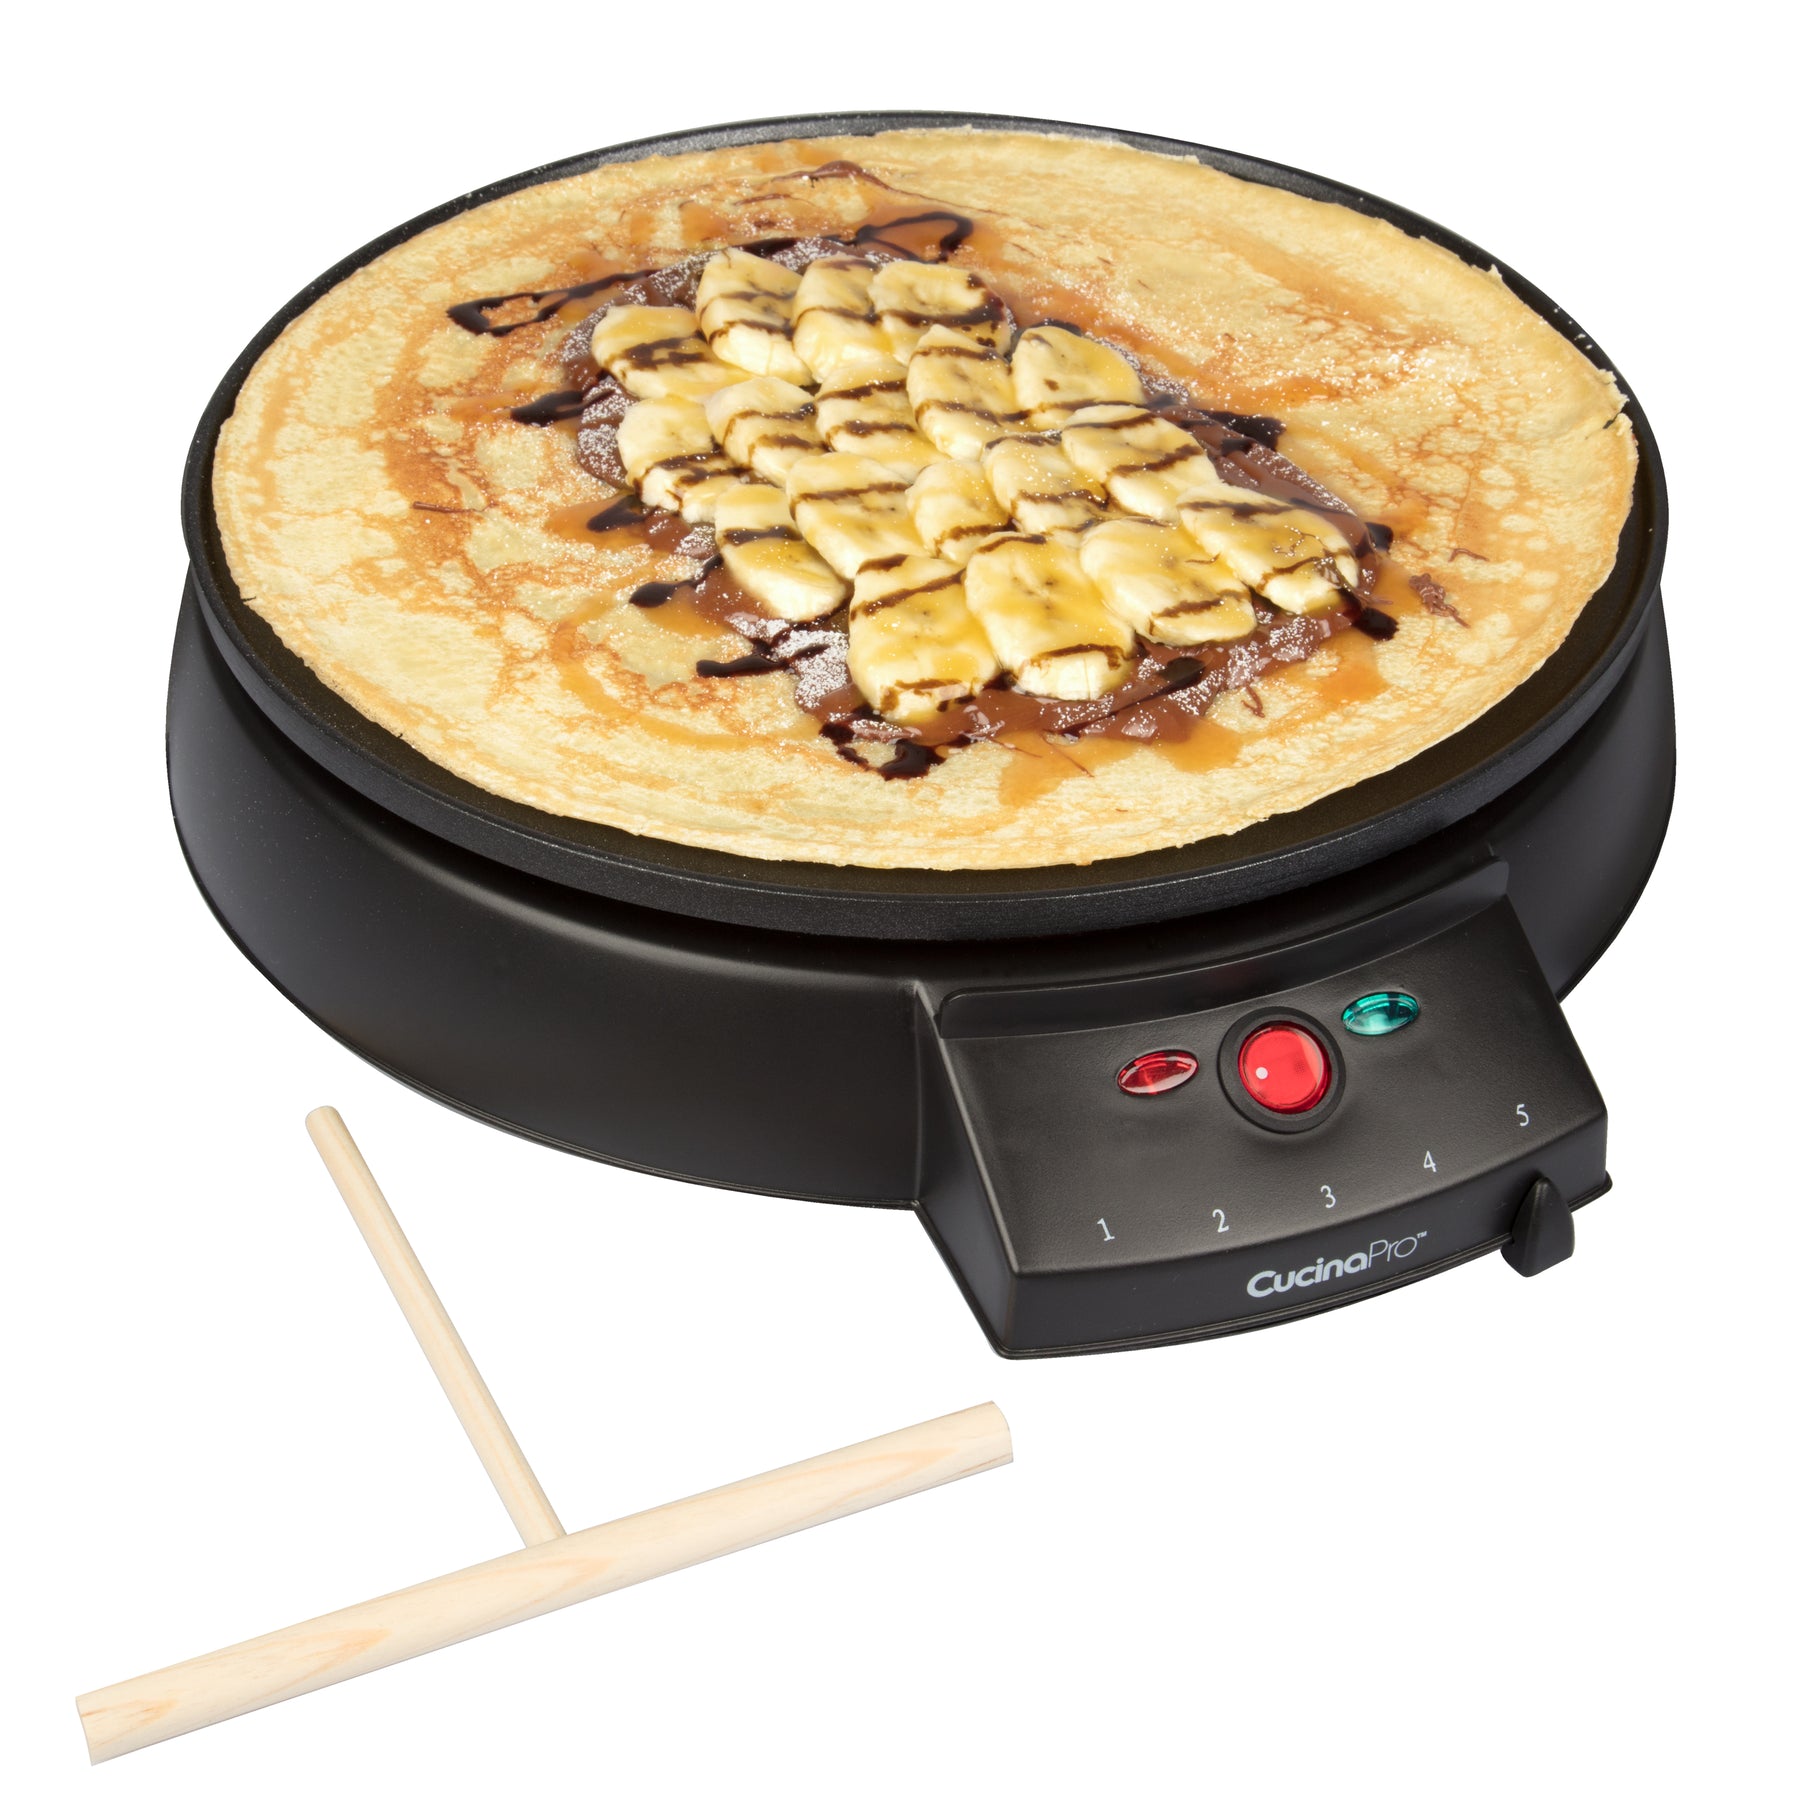 Cucinapro Cordless Crepe Maker with Recipe Guide - 1447 100% Non-Stick Surface